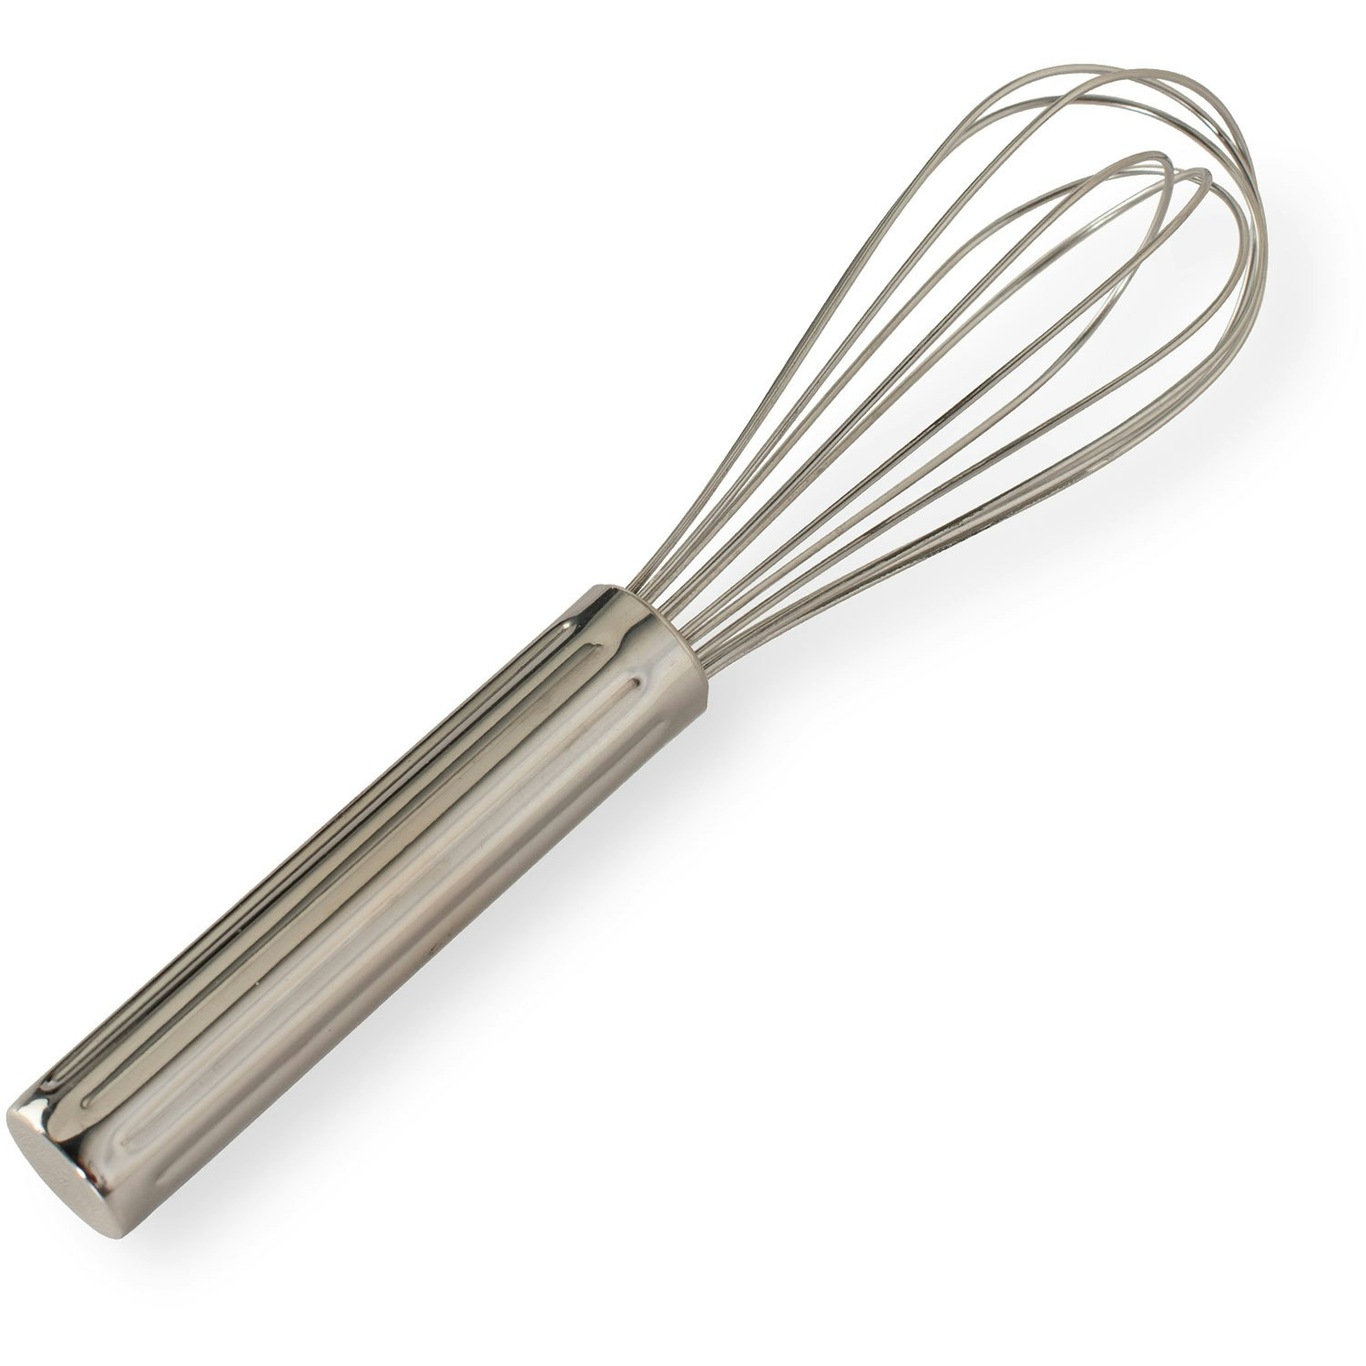 https://royaldesign.com/image/2/nordic-ware-small-balloon-whisk-1?w=800&quality=80